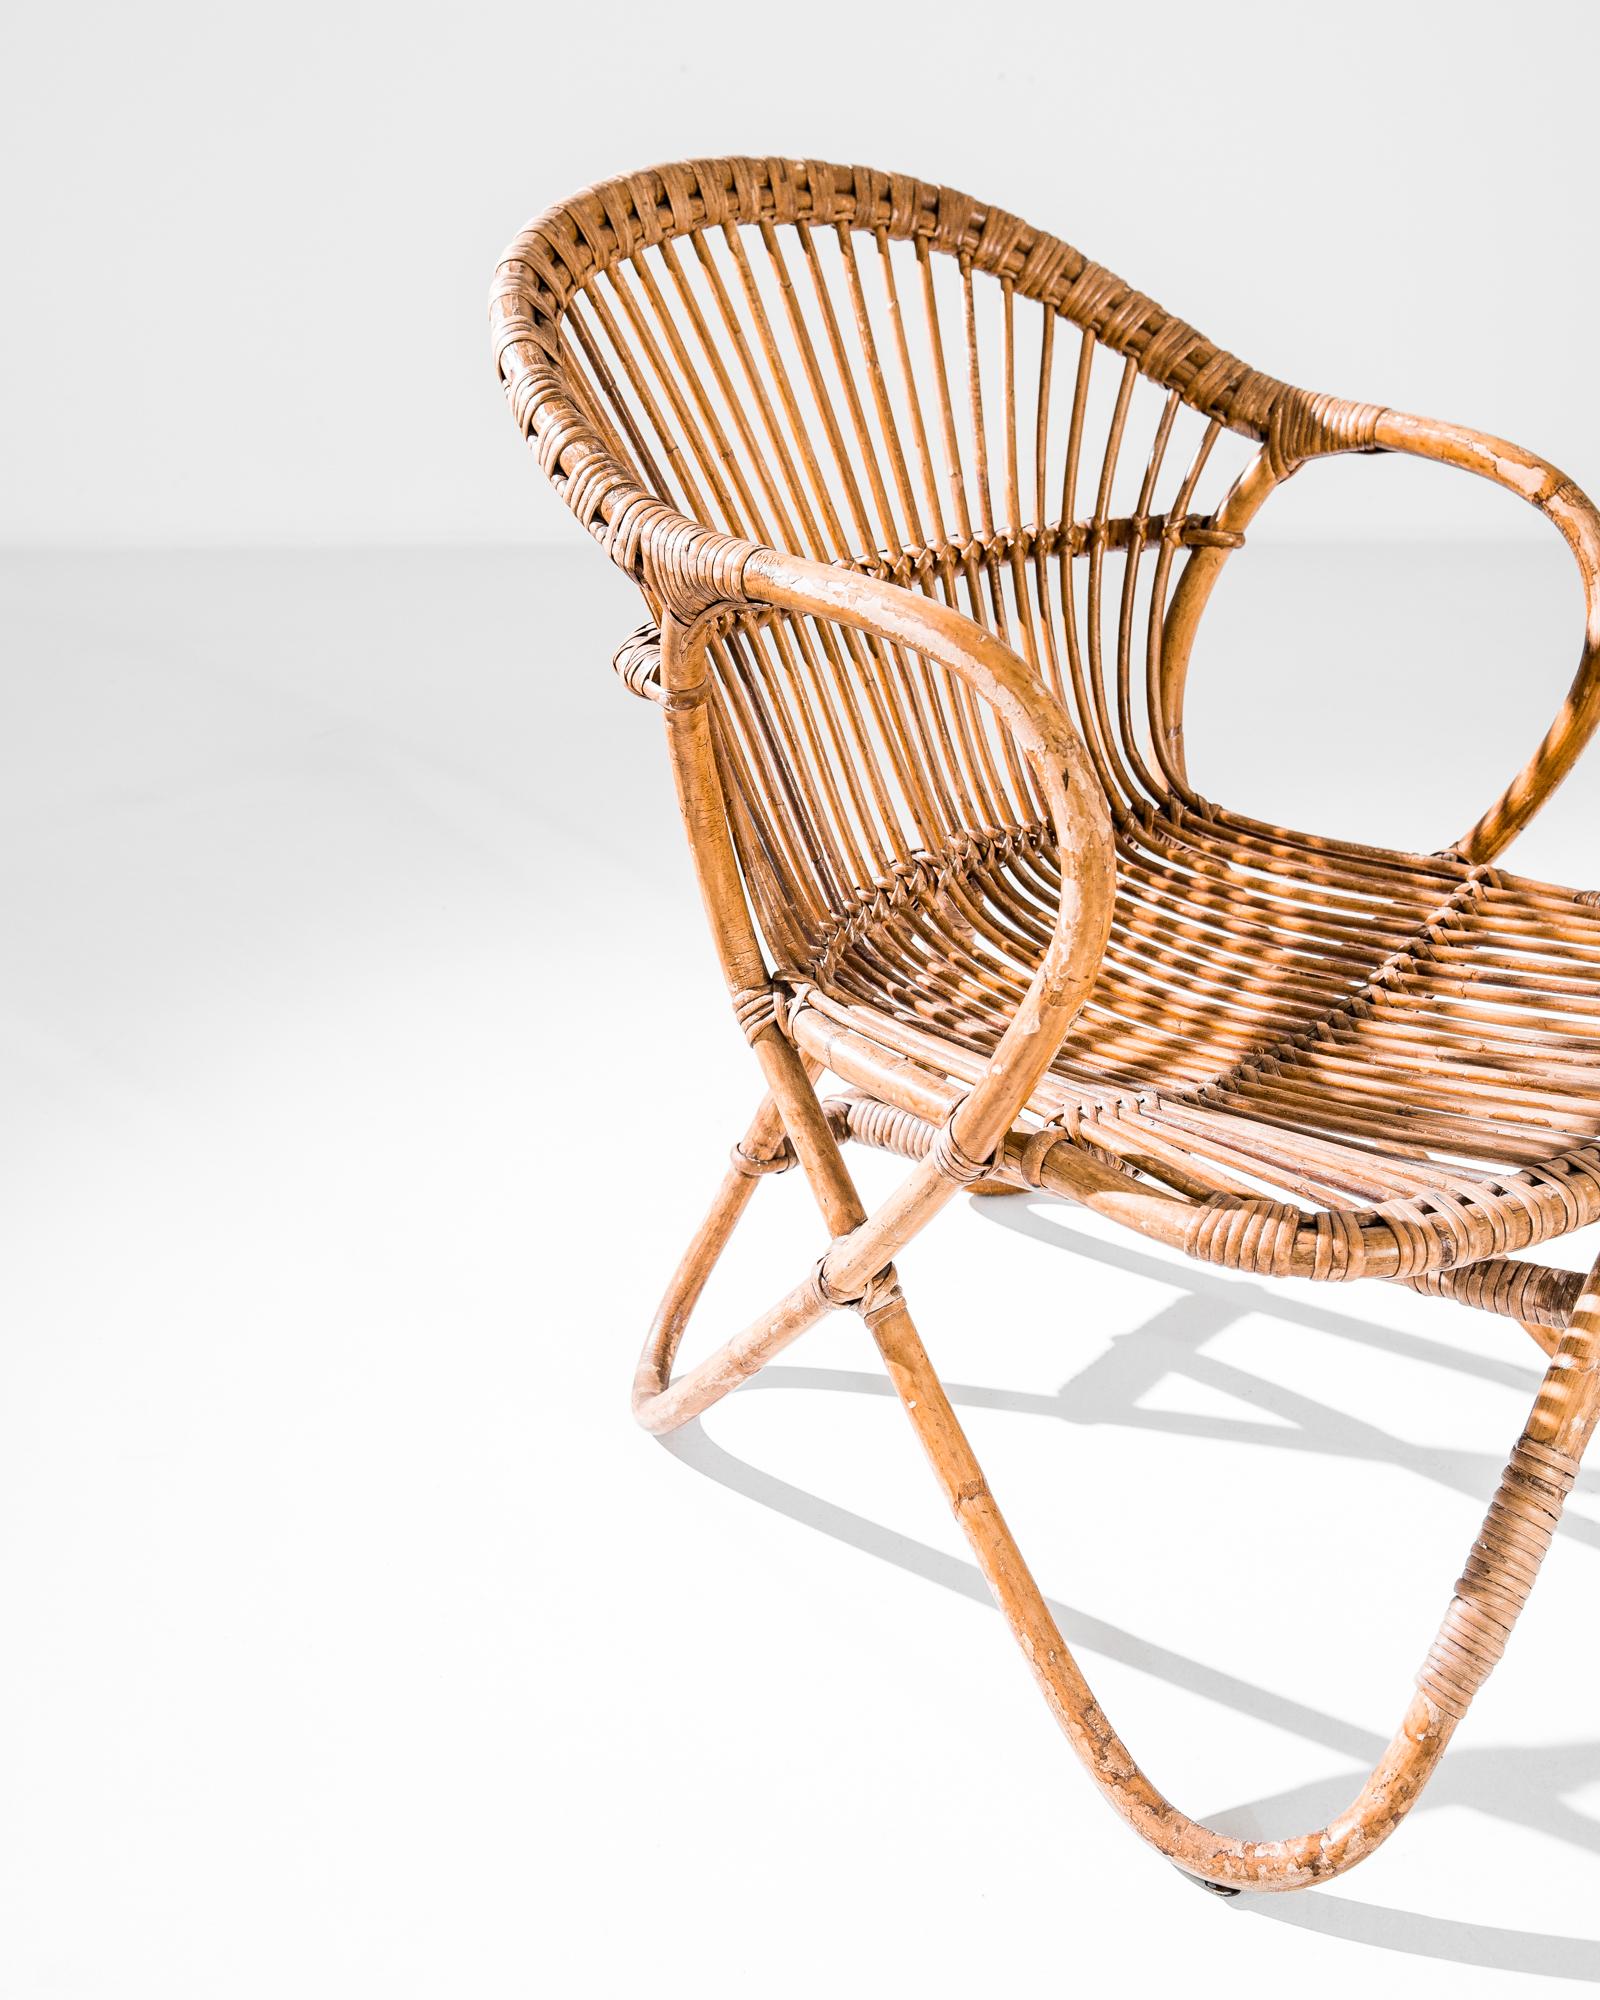 A bamboo armchair from 1960s France. The honeyed tone and natural lightness of the rattan vine gift the frame an airiness and warmth. Hand-woven detail adds a homey, organic accent. The curves of the looping arms and deep circular seat create a